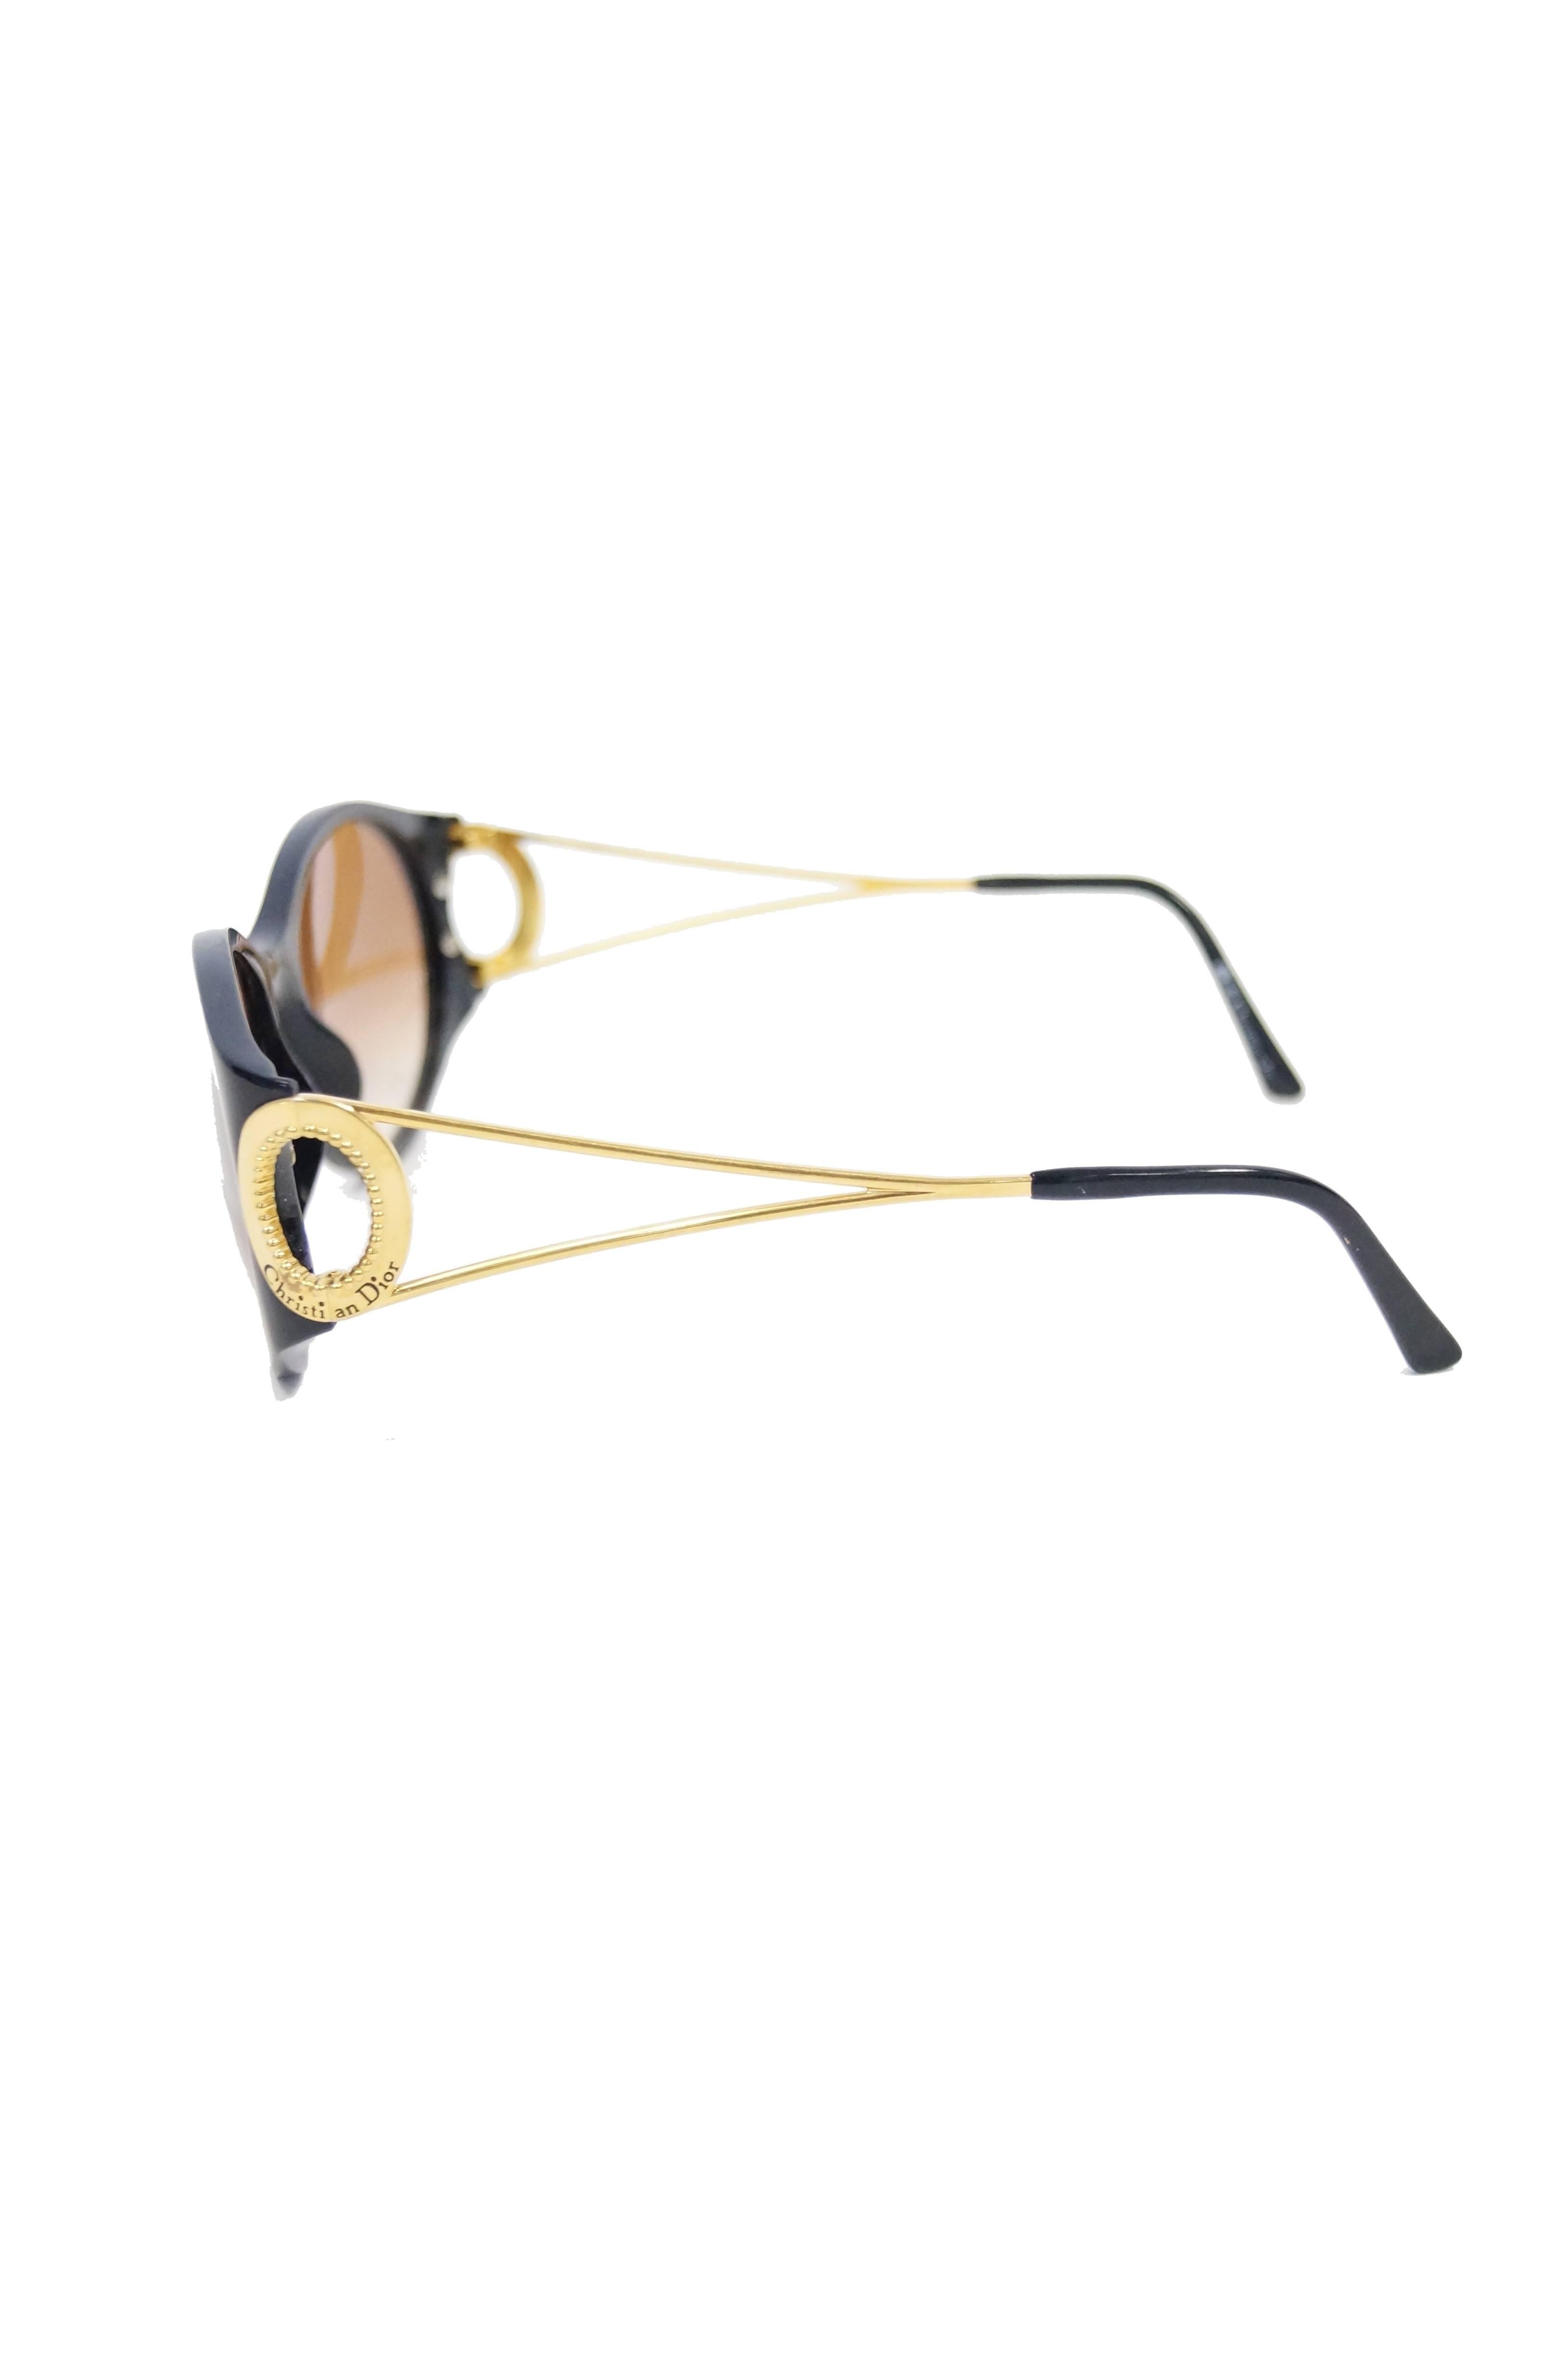 1980s Christian Dior 2661 Sunglasses. The glasses are composed of glossy black acrylic, with gold -tone, open - structure temples with black earpiece tips. The hinges of the glasses are gold - tone and circular, with 